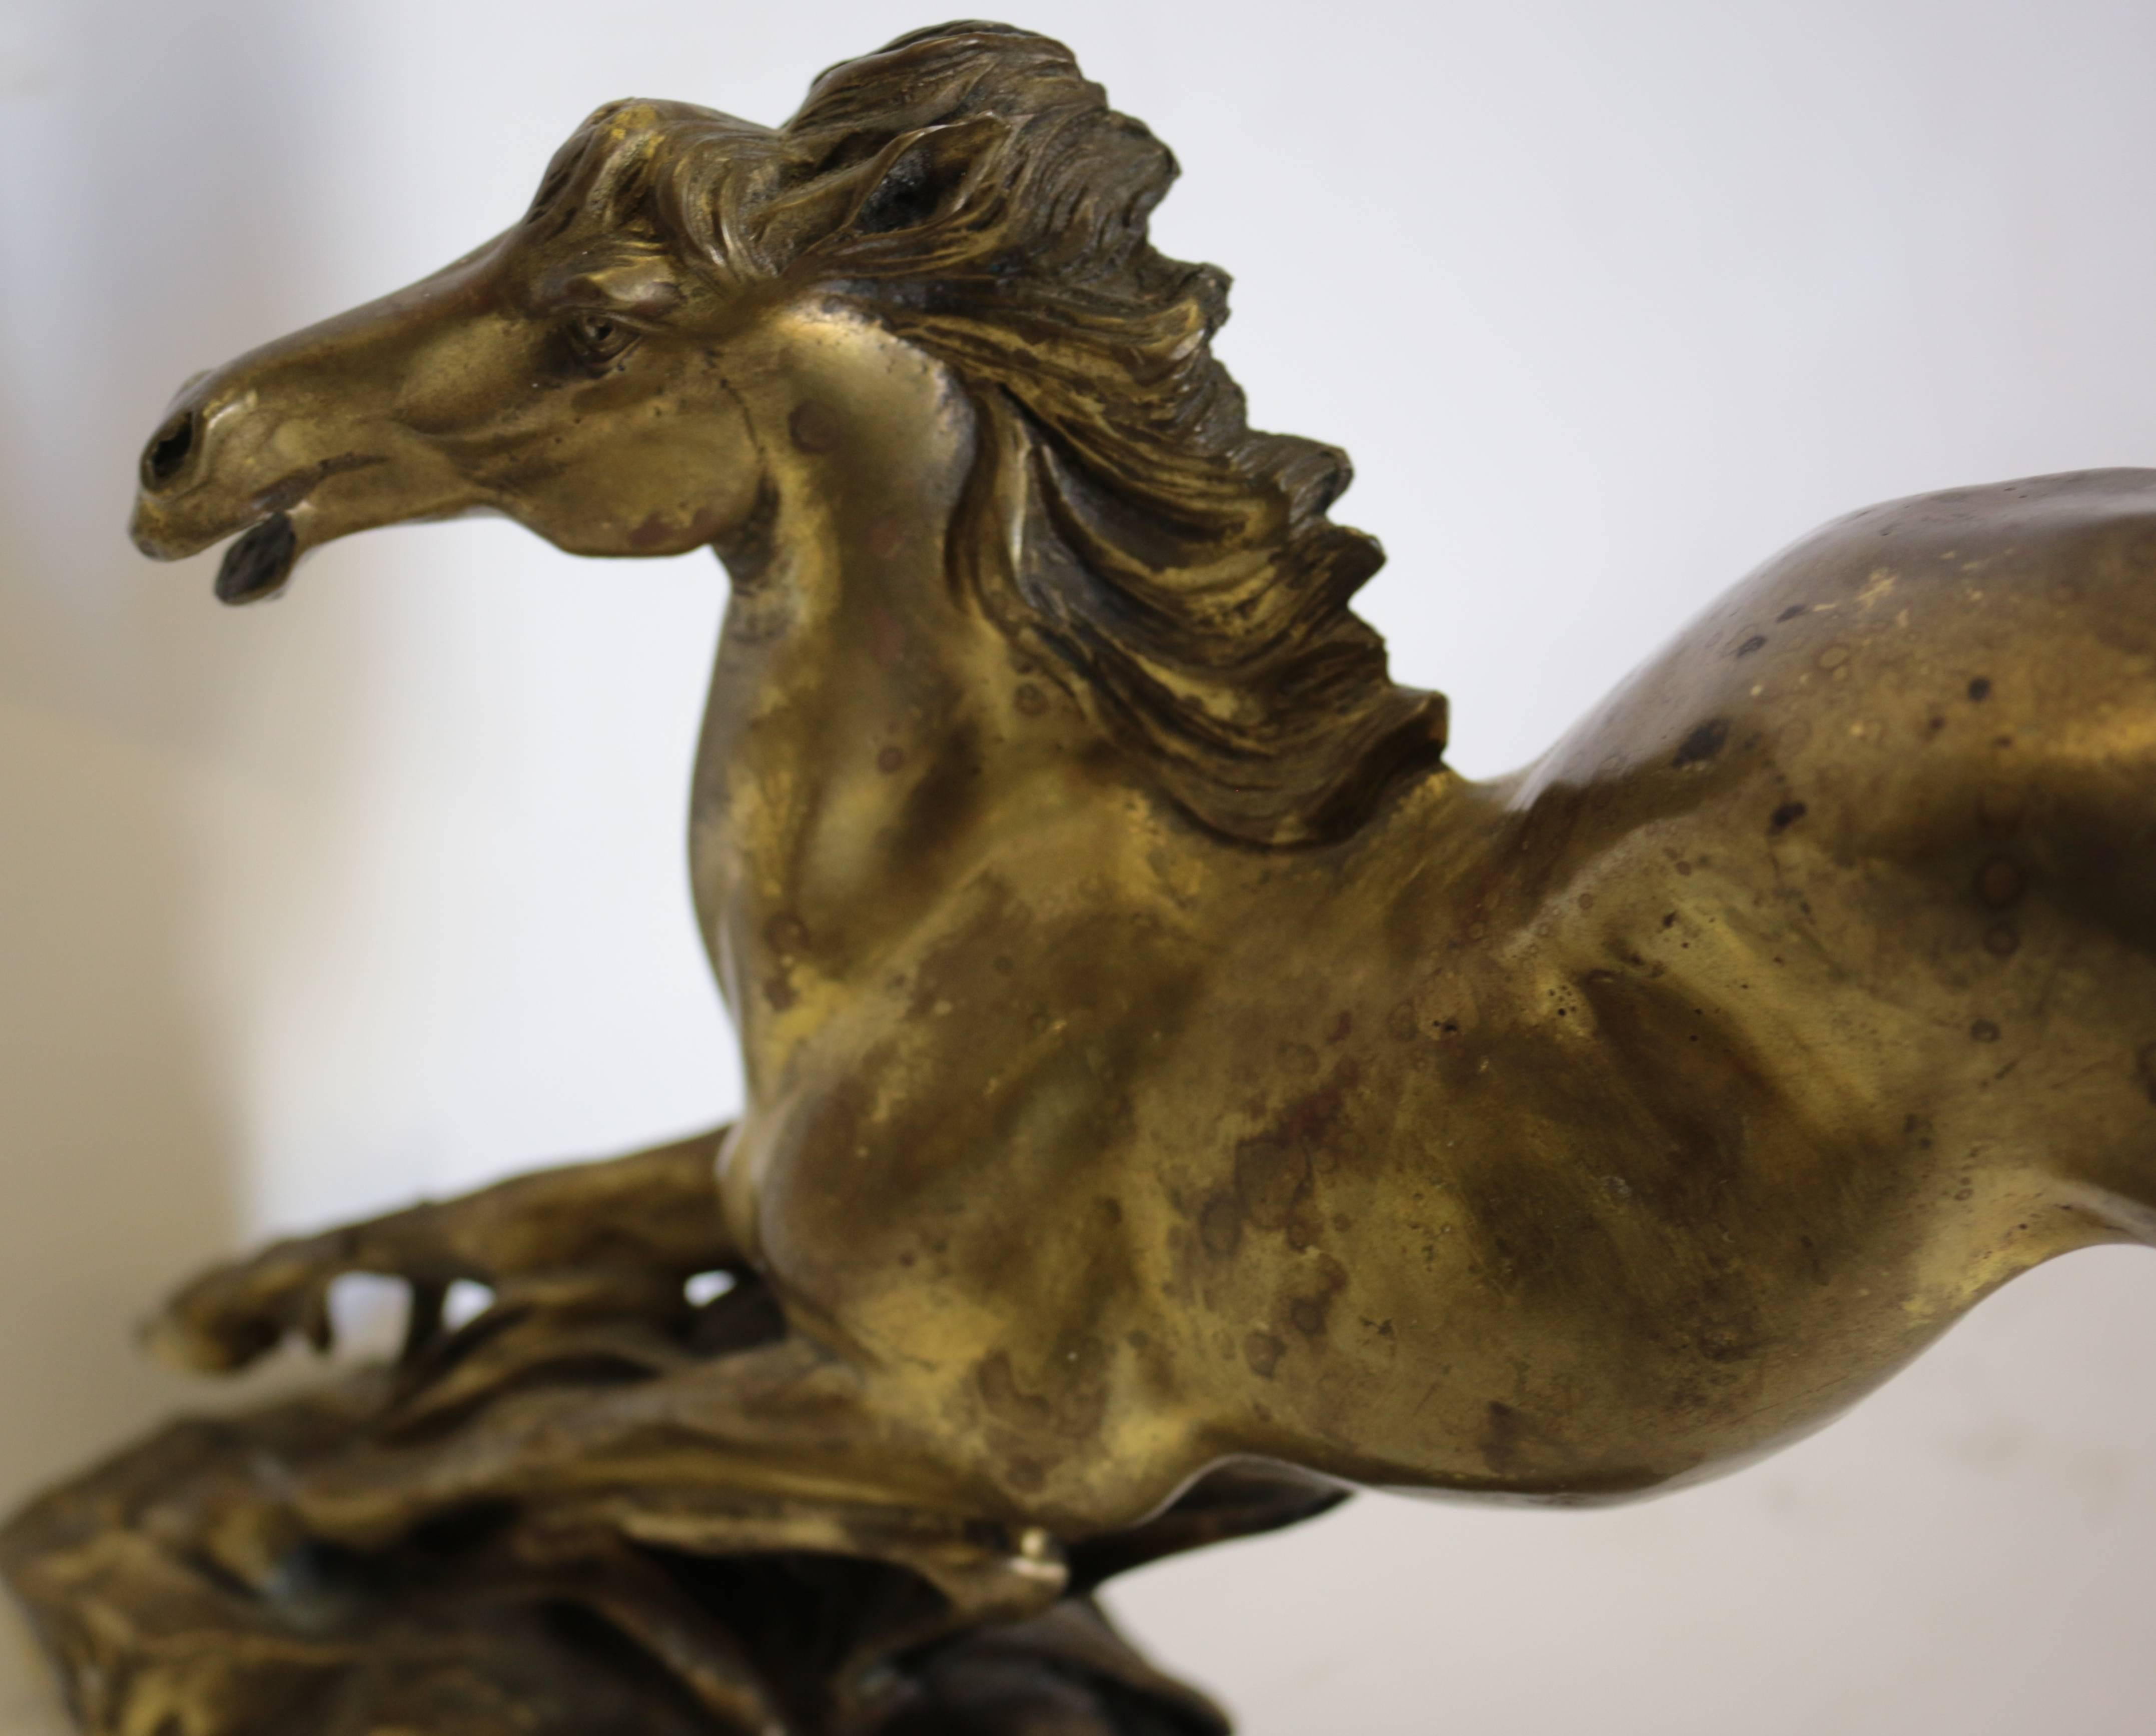 Beautiful decorative bronze Italian horse statue with a very rich gold patina. In excellent used condition.